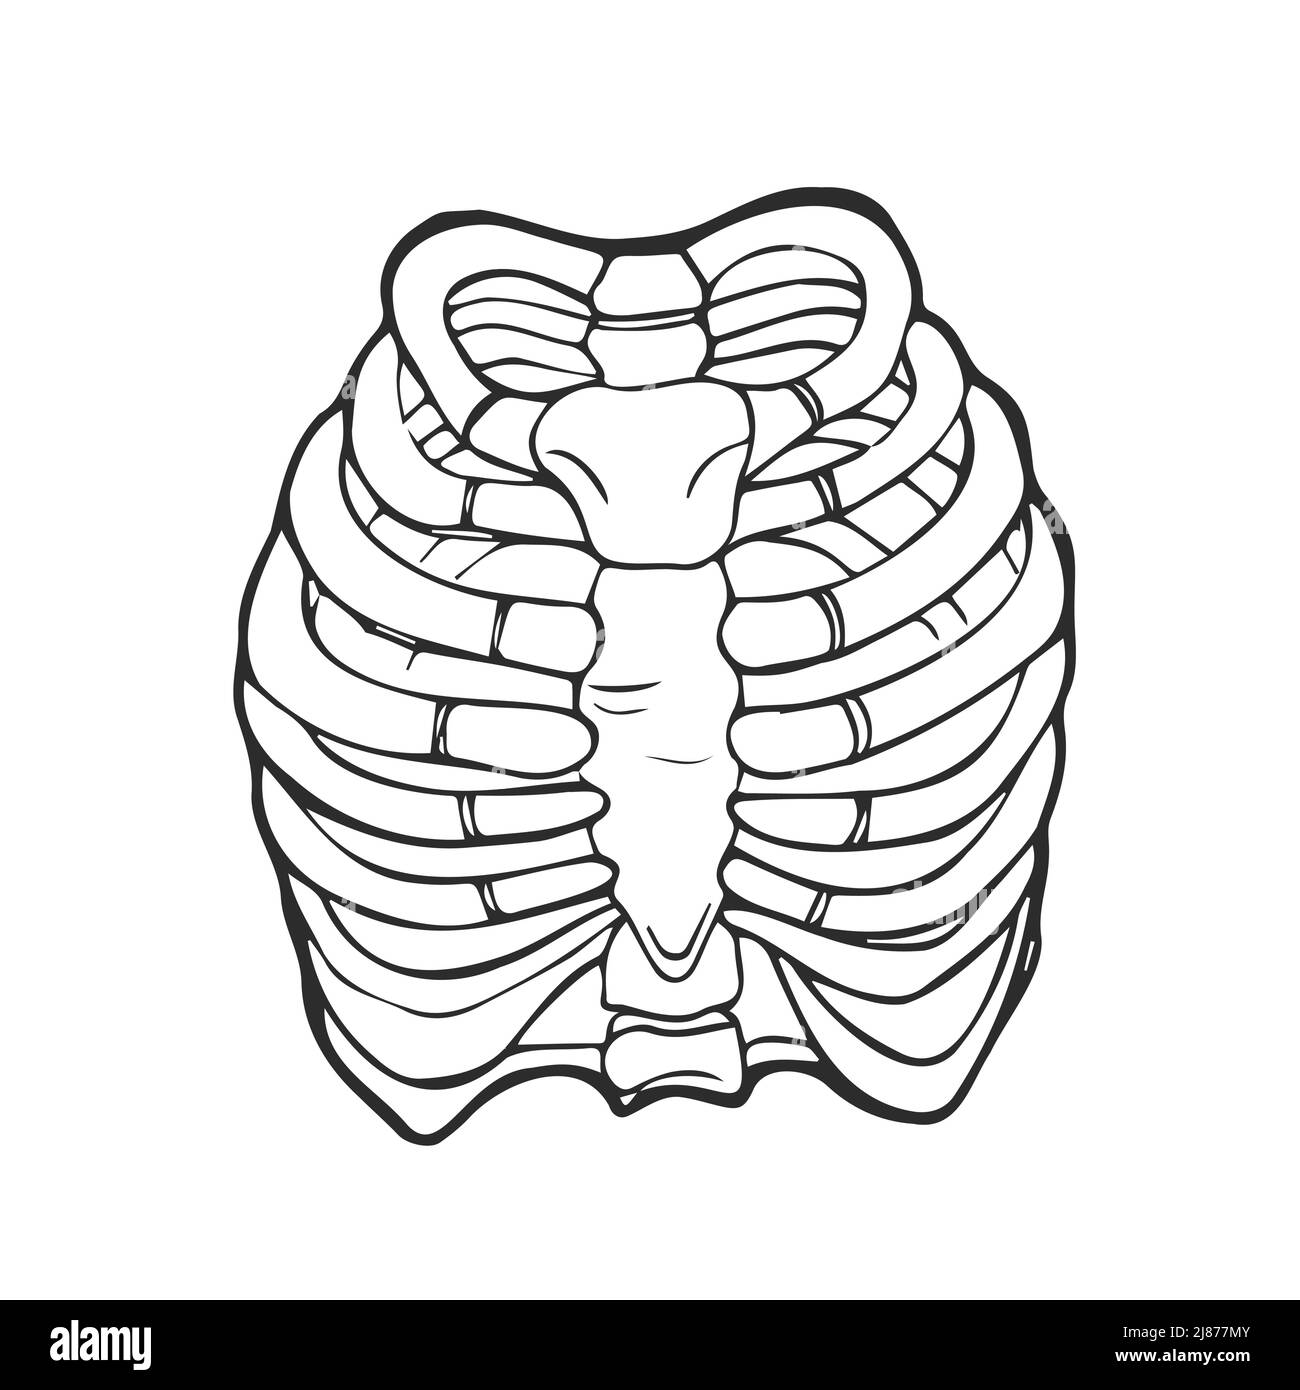 How to Draw a Rib Cage  An Easy Rib Cage Drawing